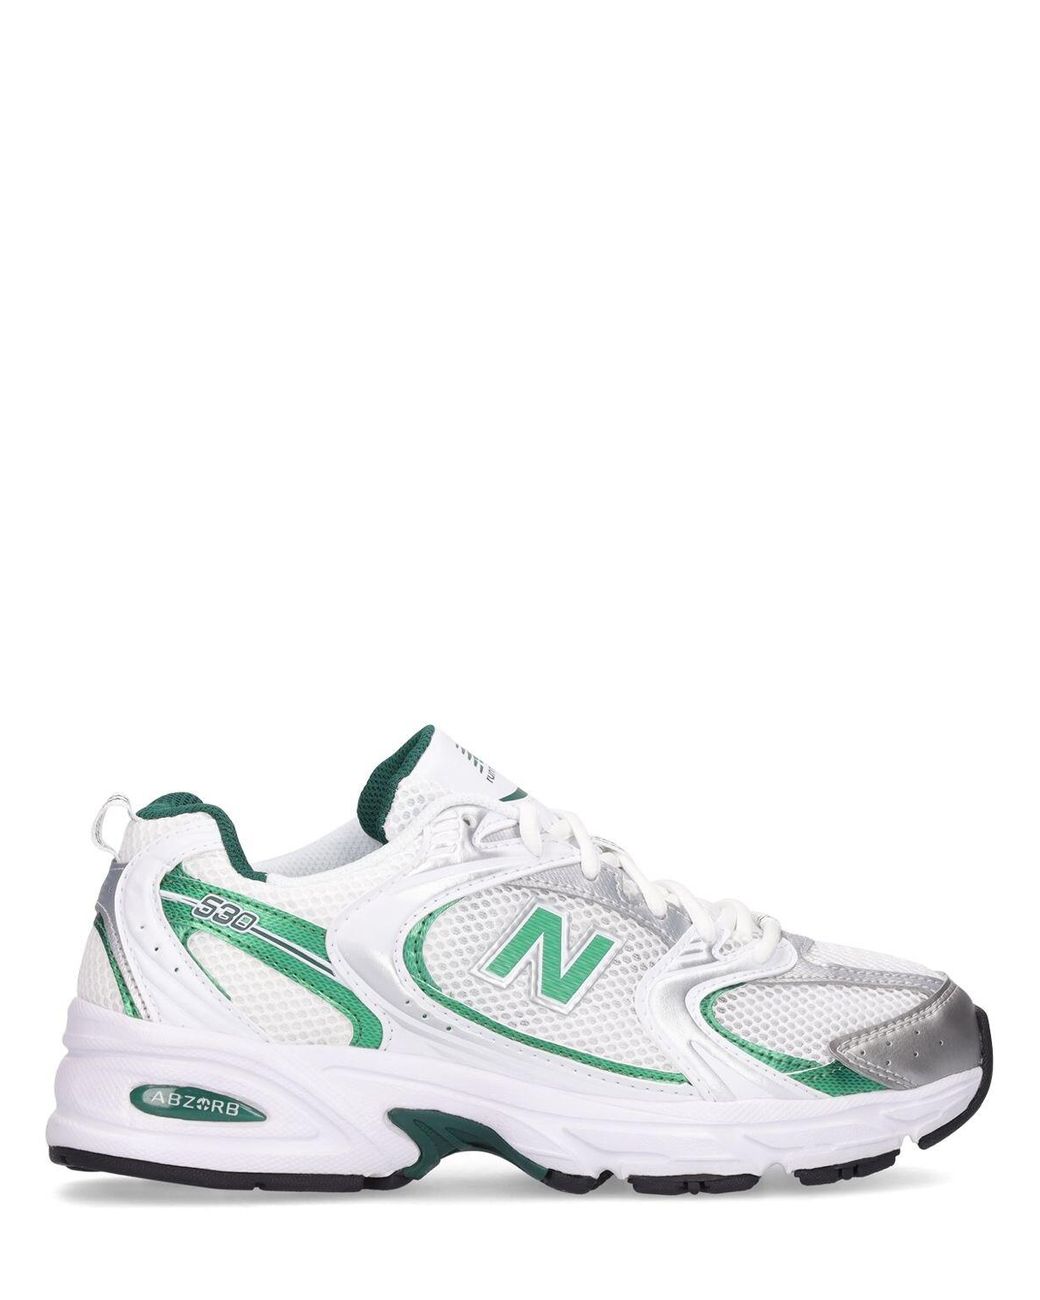 New Balance 530 Sneakers in White/Green (White) | Lyst Canada